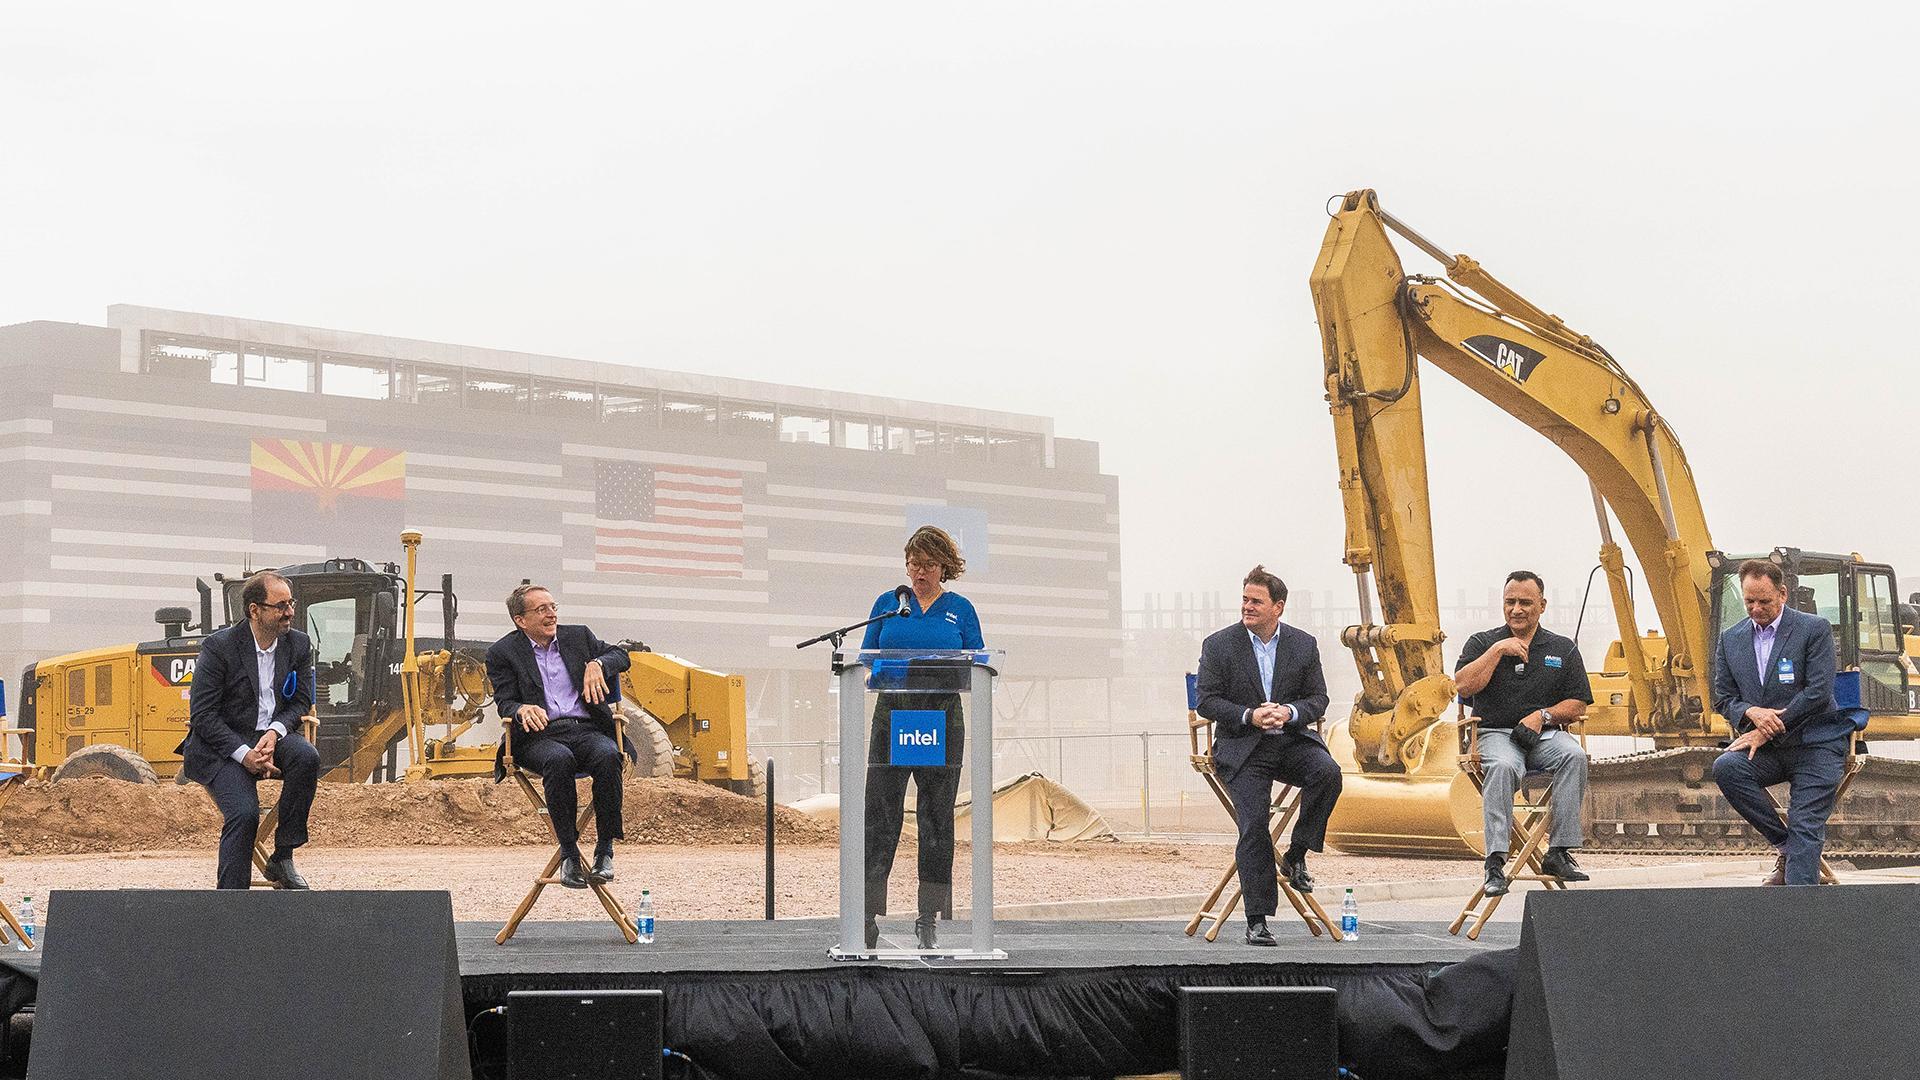 10 to 1 Public Relations Promotes Intel Ribbon Cutting of $20 Billion Project in Arizona 